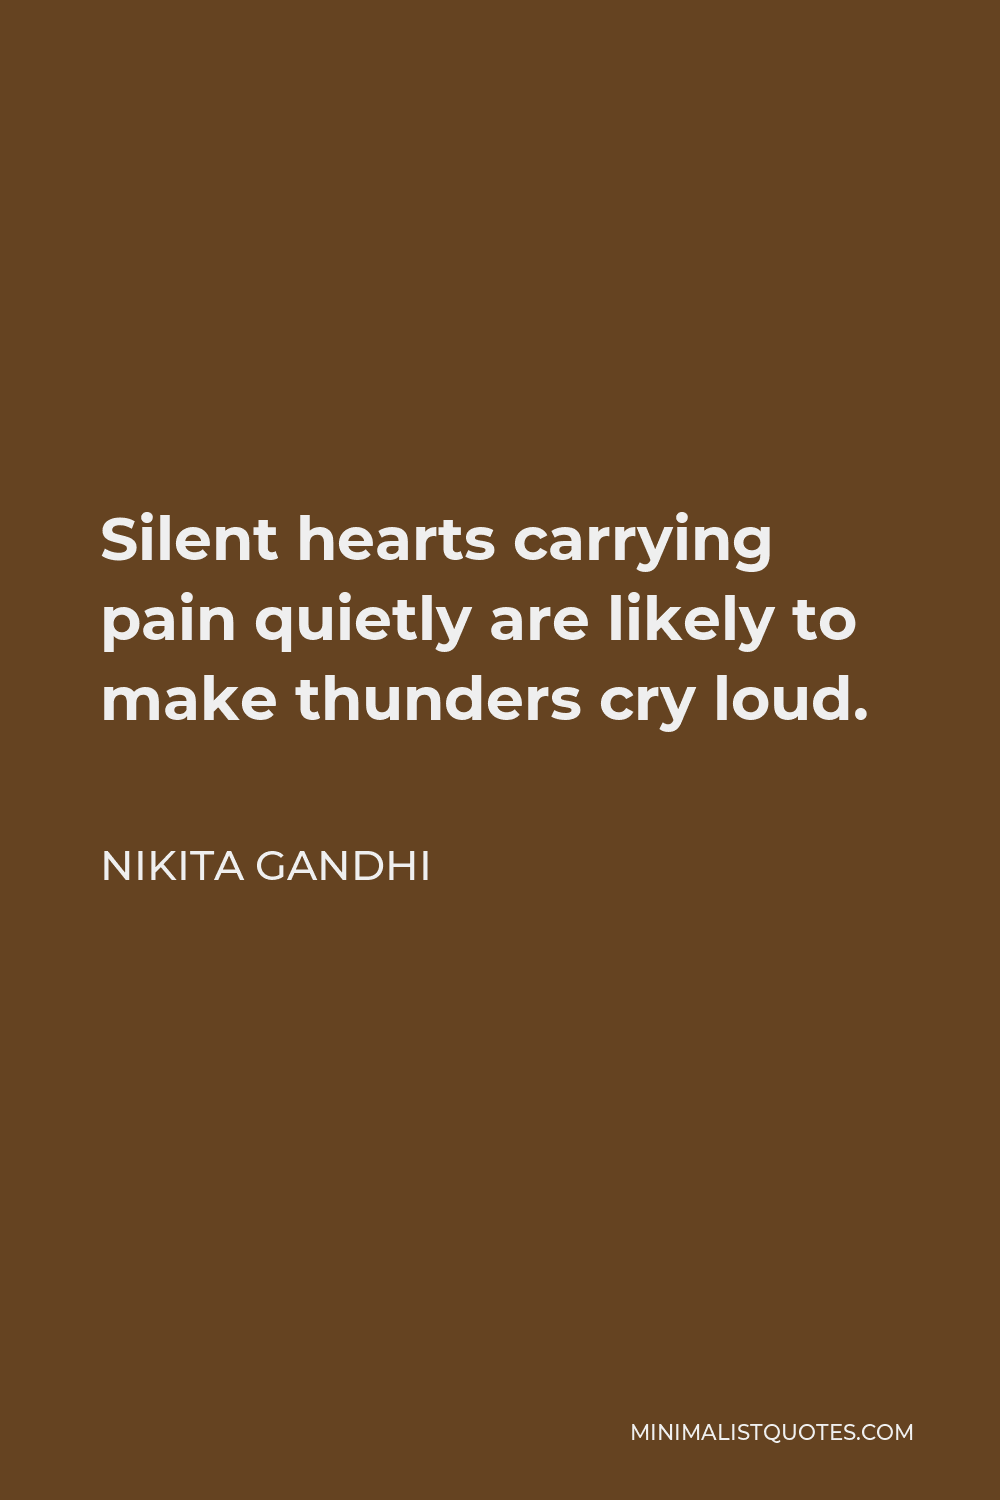 Nikita Gandhi Quote - Silent hearts carrying pain quietly are likely to make thunders cry loud.